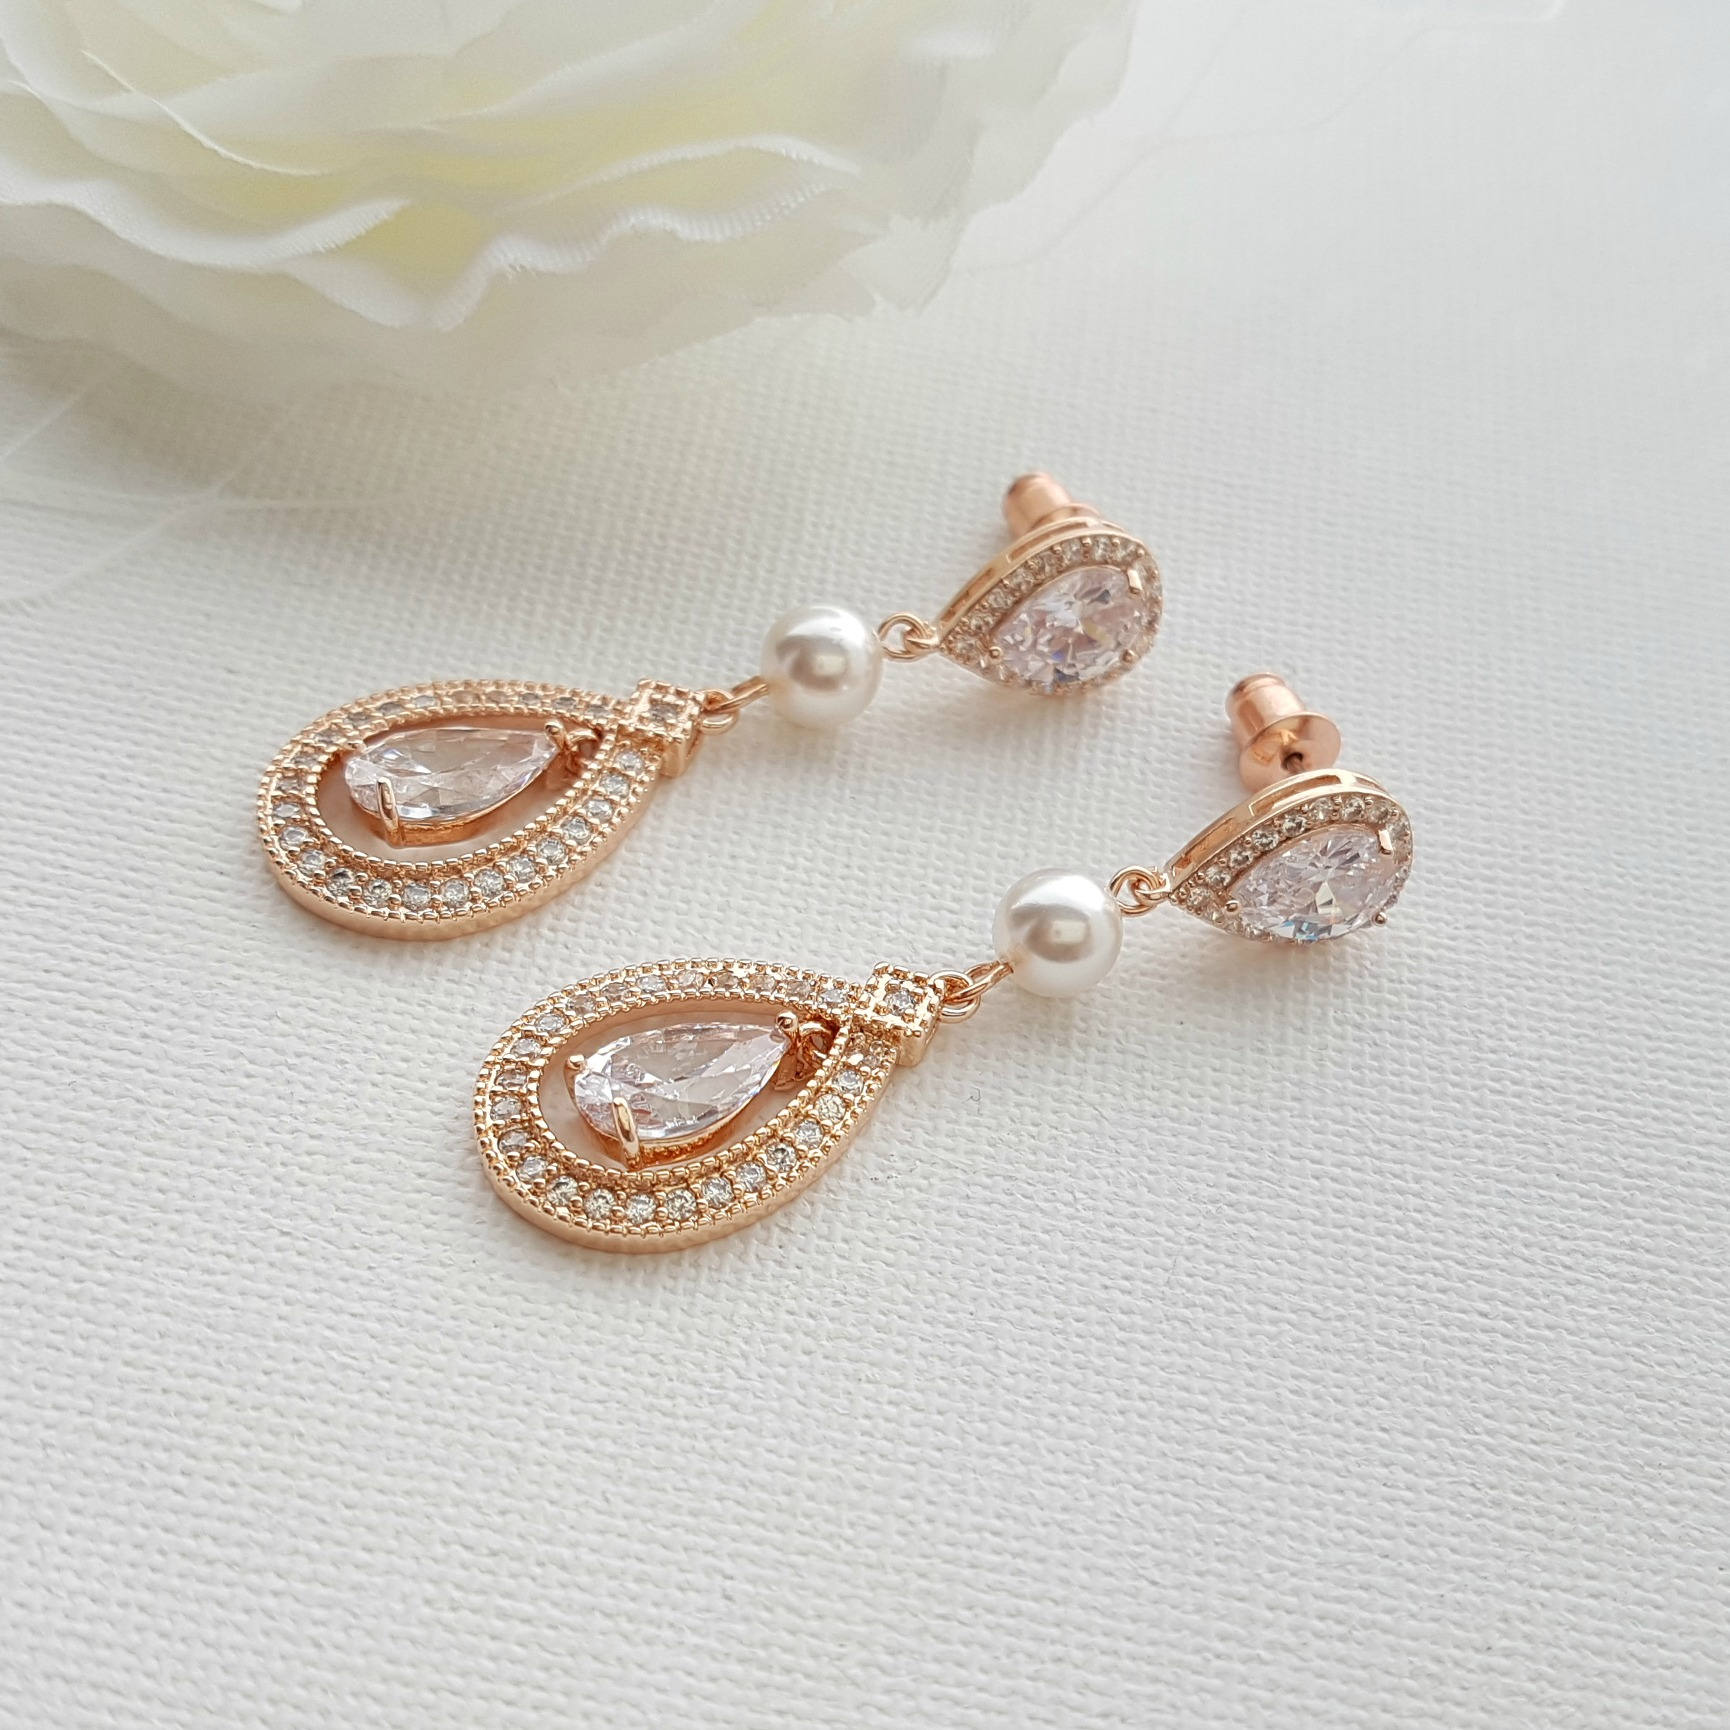 Rose Gold Bridal Earrings in Pearls & Cubic Zirconia for Brides- Poetry Designs